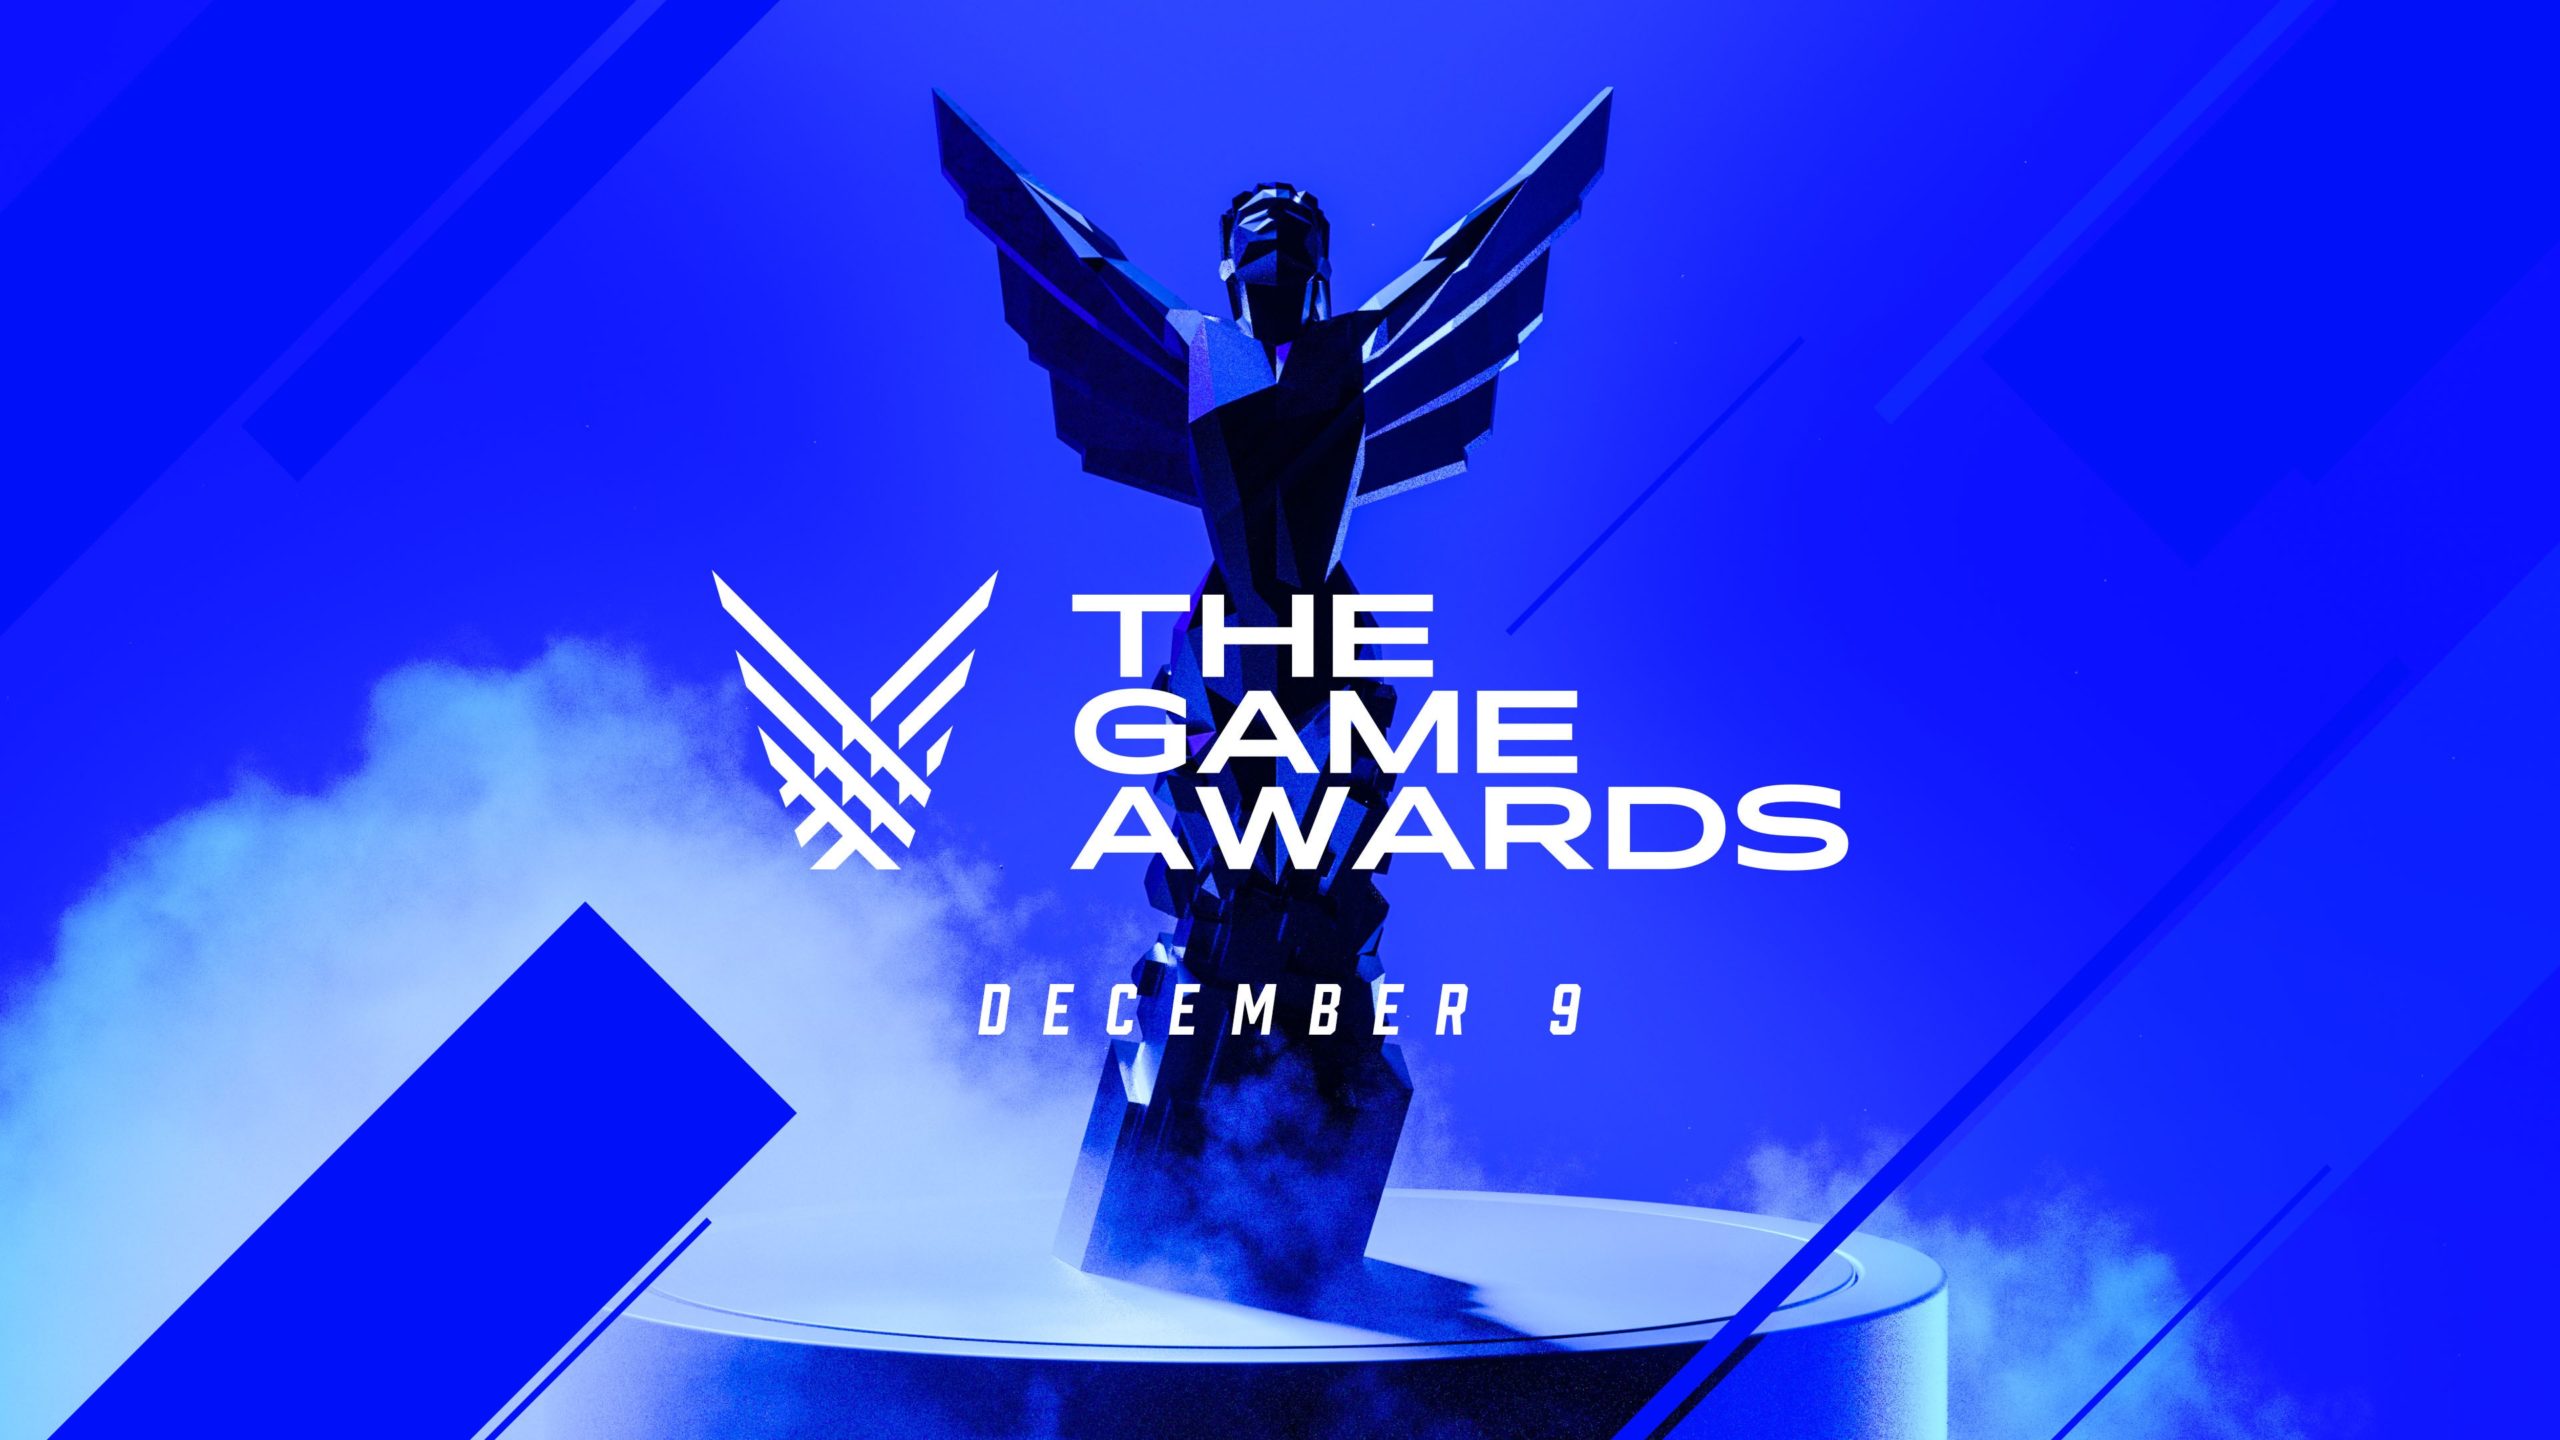 How to Watch The Game Awards 2021, and What to Expect